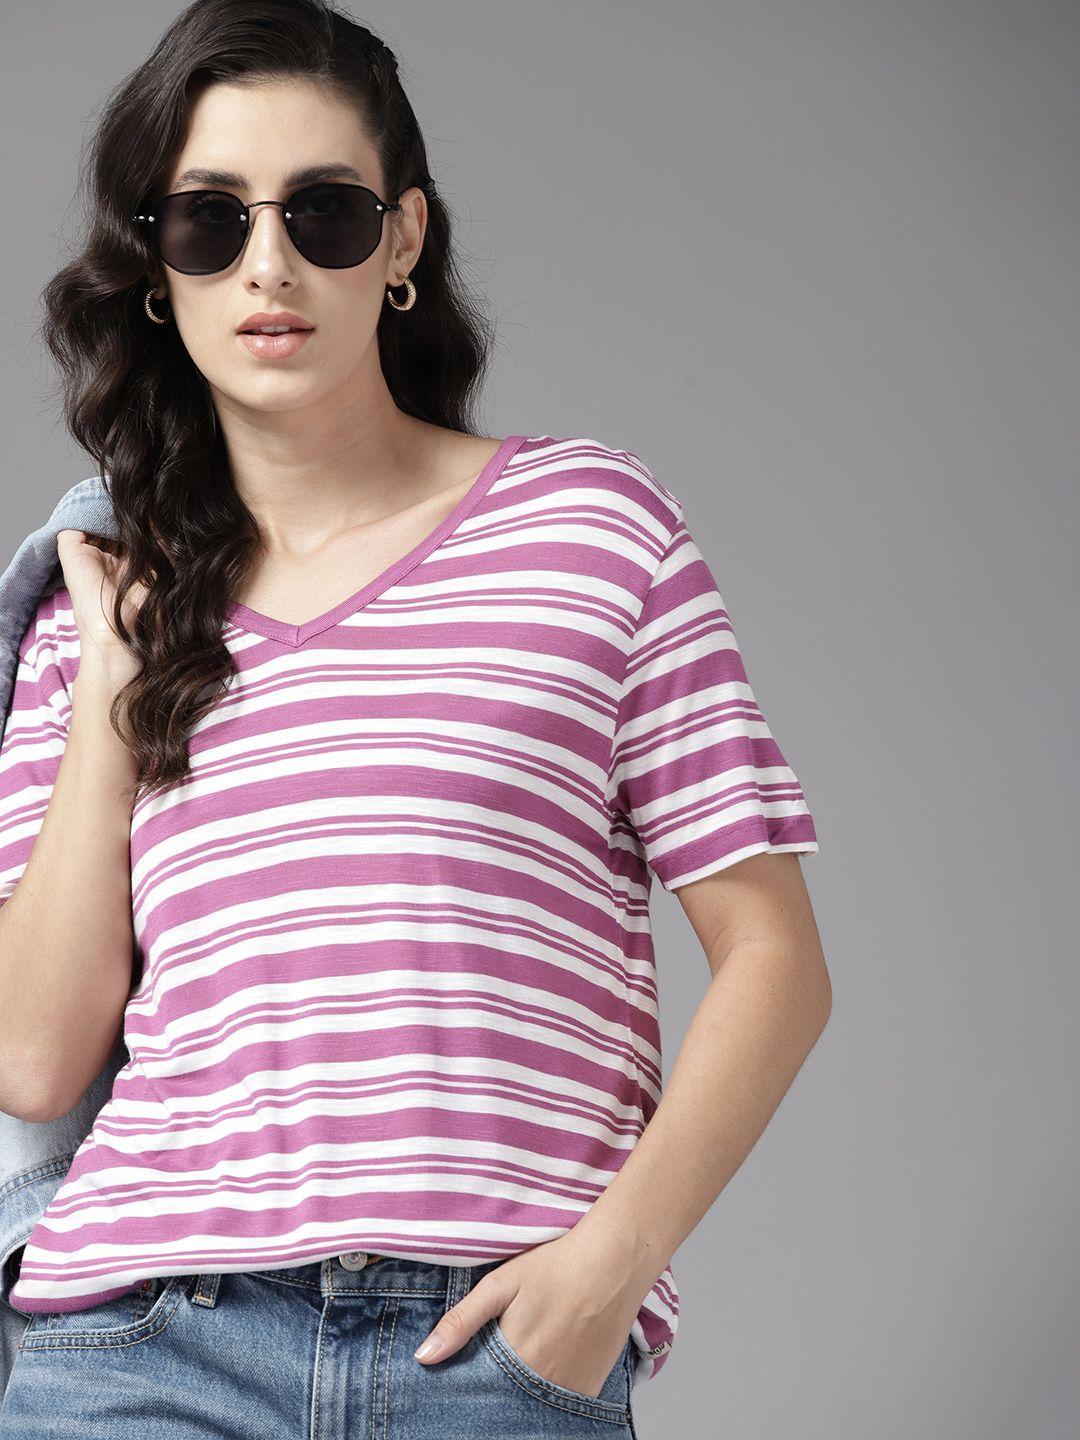 the roadster life co. striped v-neck t-shirt